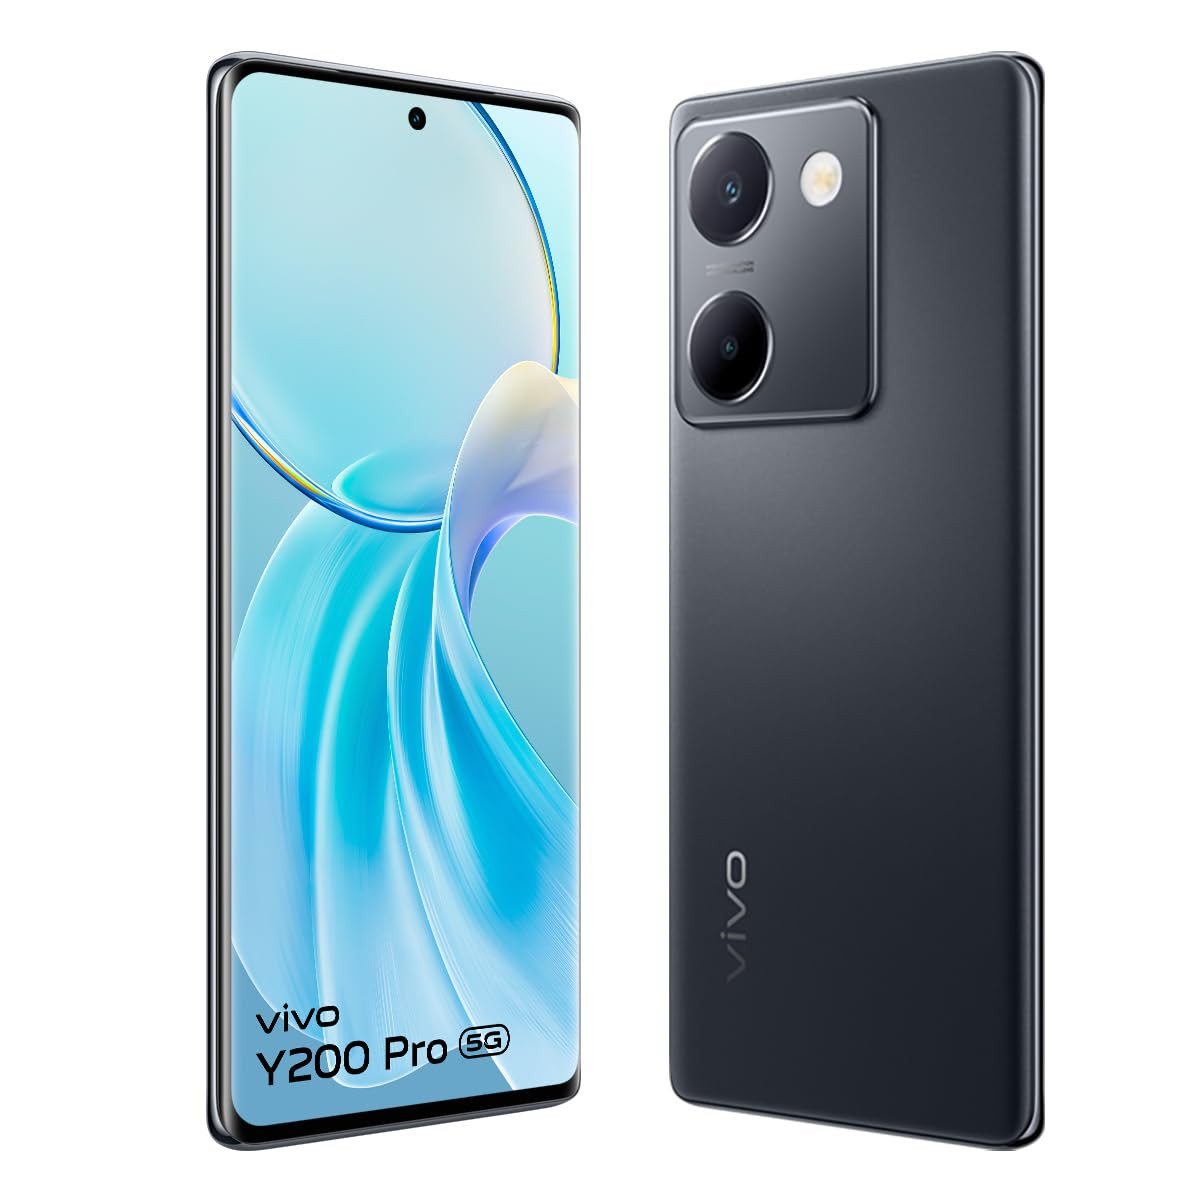 vivo Y200 Pro 5G Silk Black 8GB RAM 128GB Storage with No Cost EMIAdditional Exchange Offers  3D Curved AMOLED Display